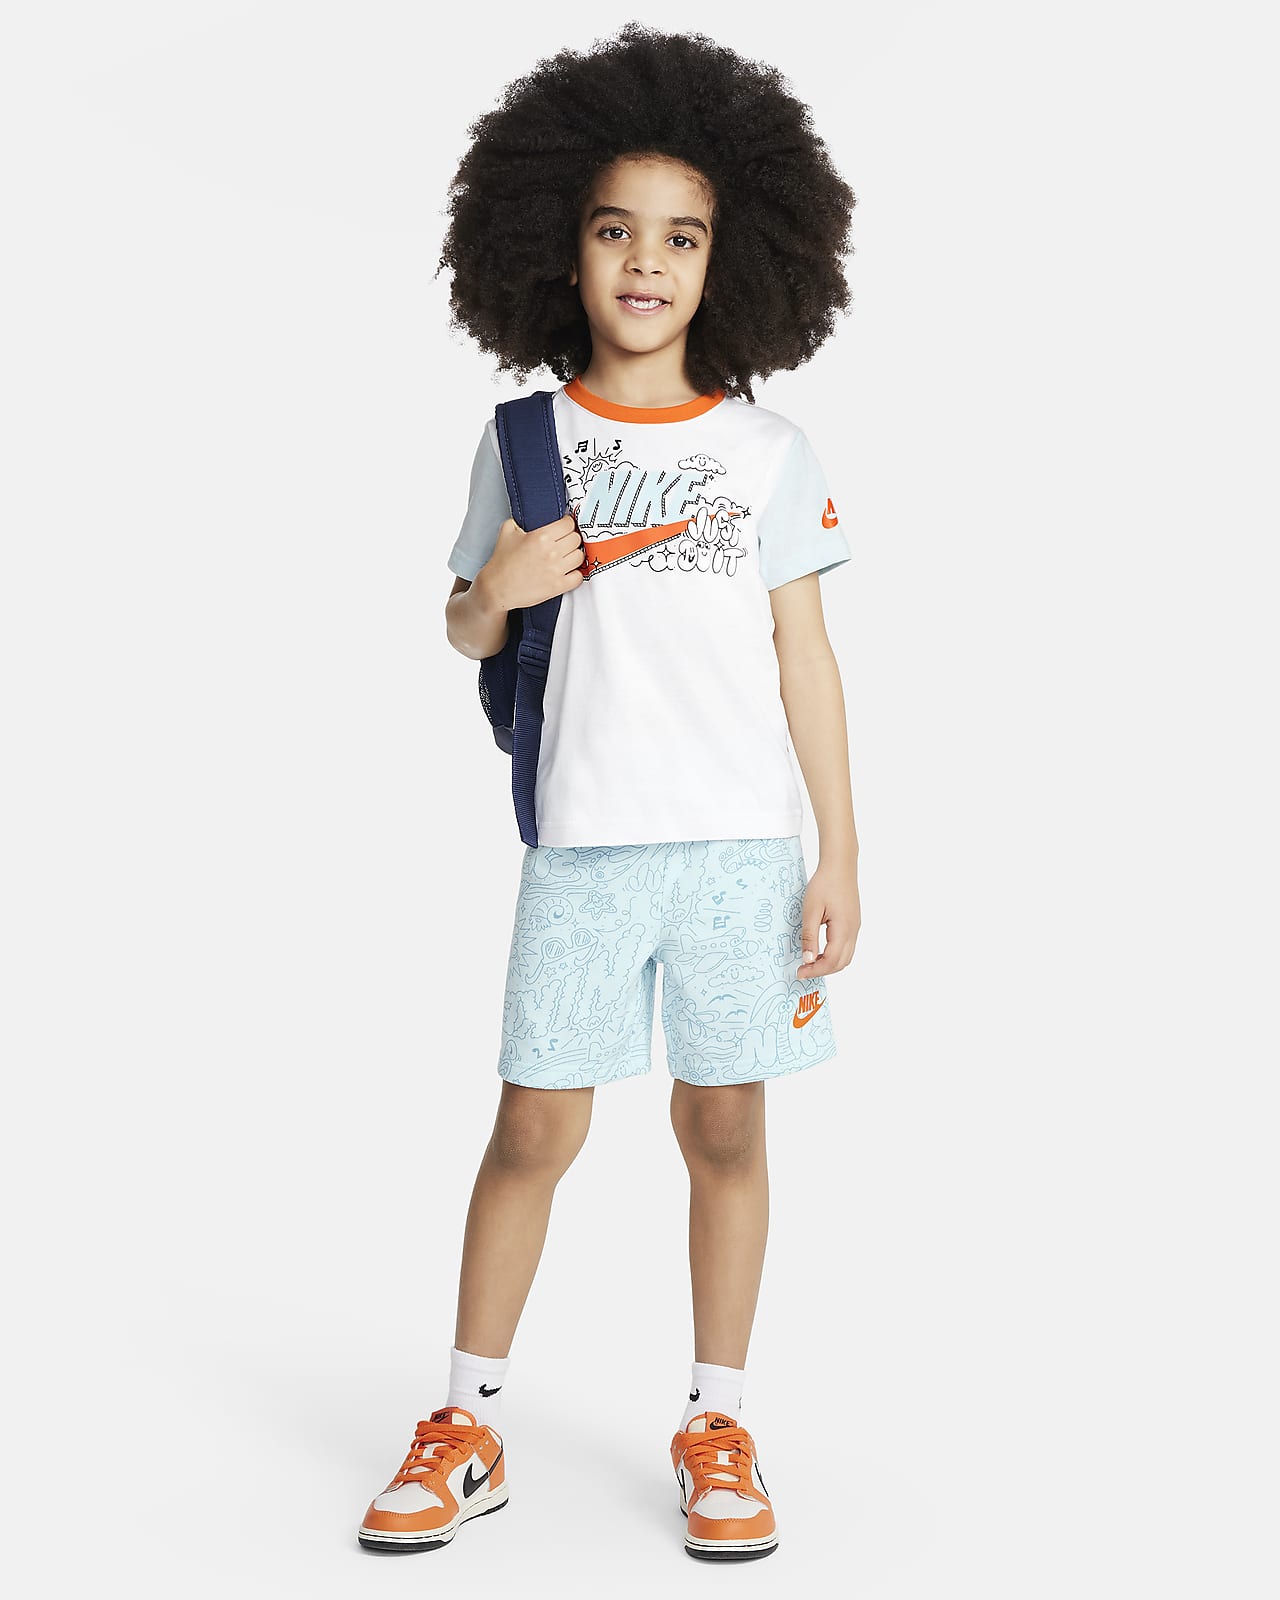 Nike Sportswear Create Your Own Adventure Little Kids' T-Shirt and Shorts Set